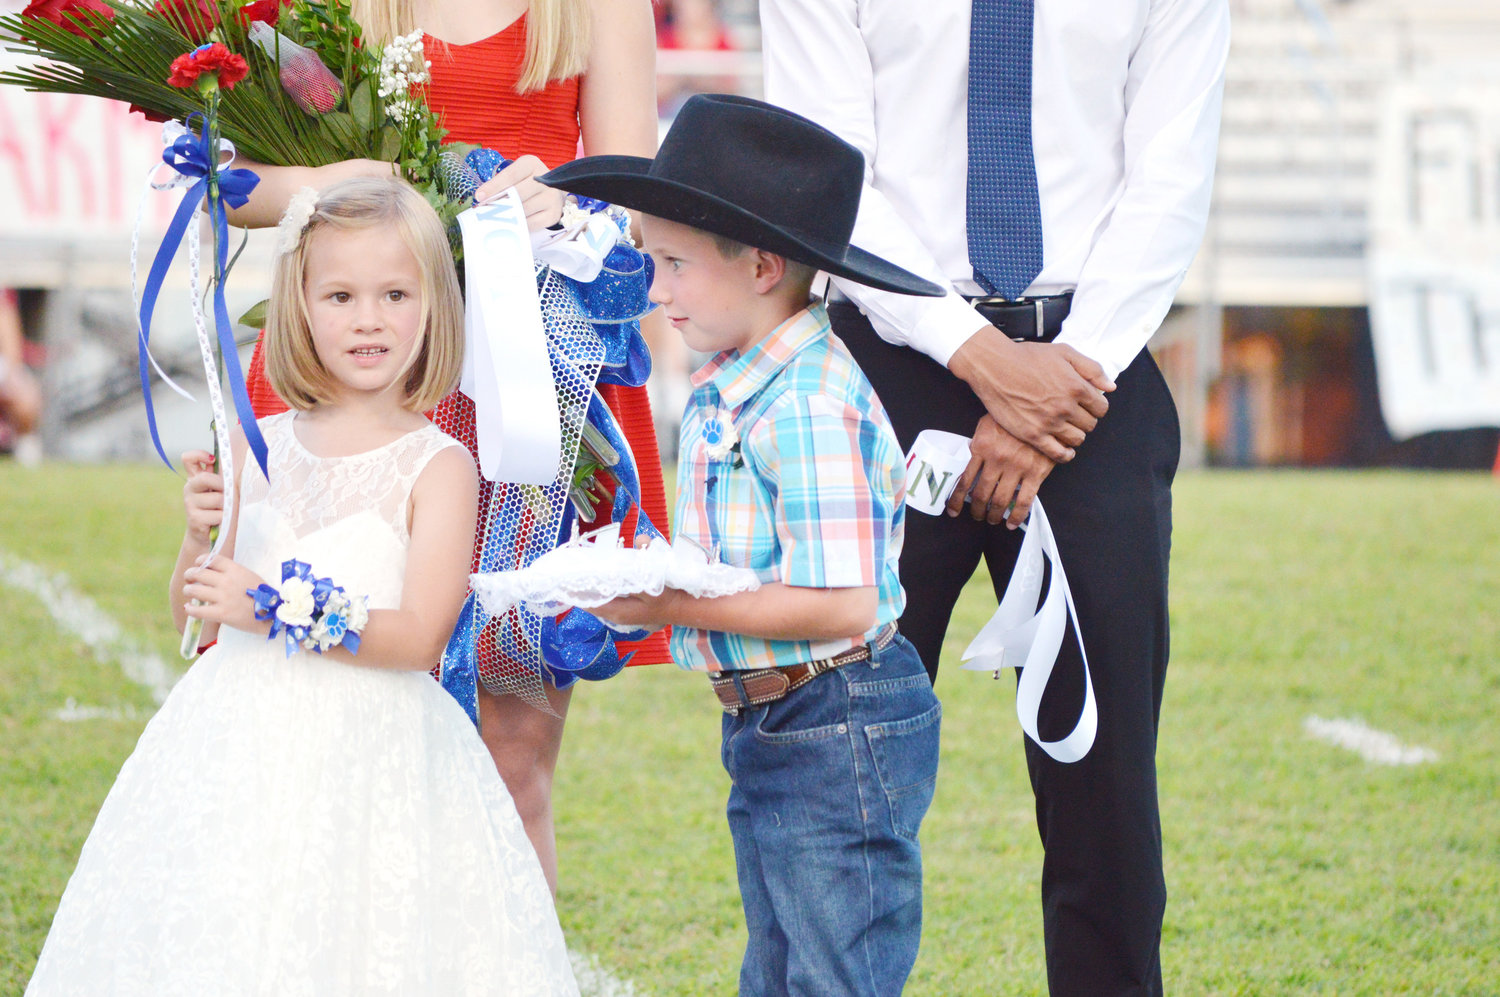 Flower girl Lola Hayes and the crown bearer Jake Perkins did a great job Friday night at homecoming honoring the new queen and king.